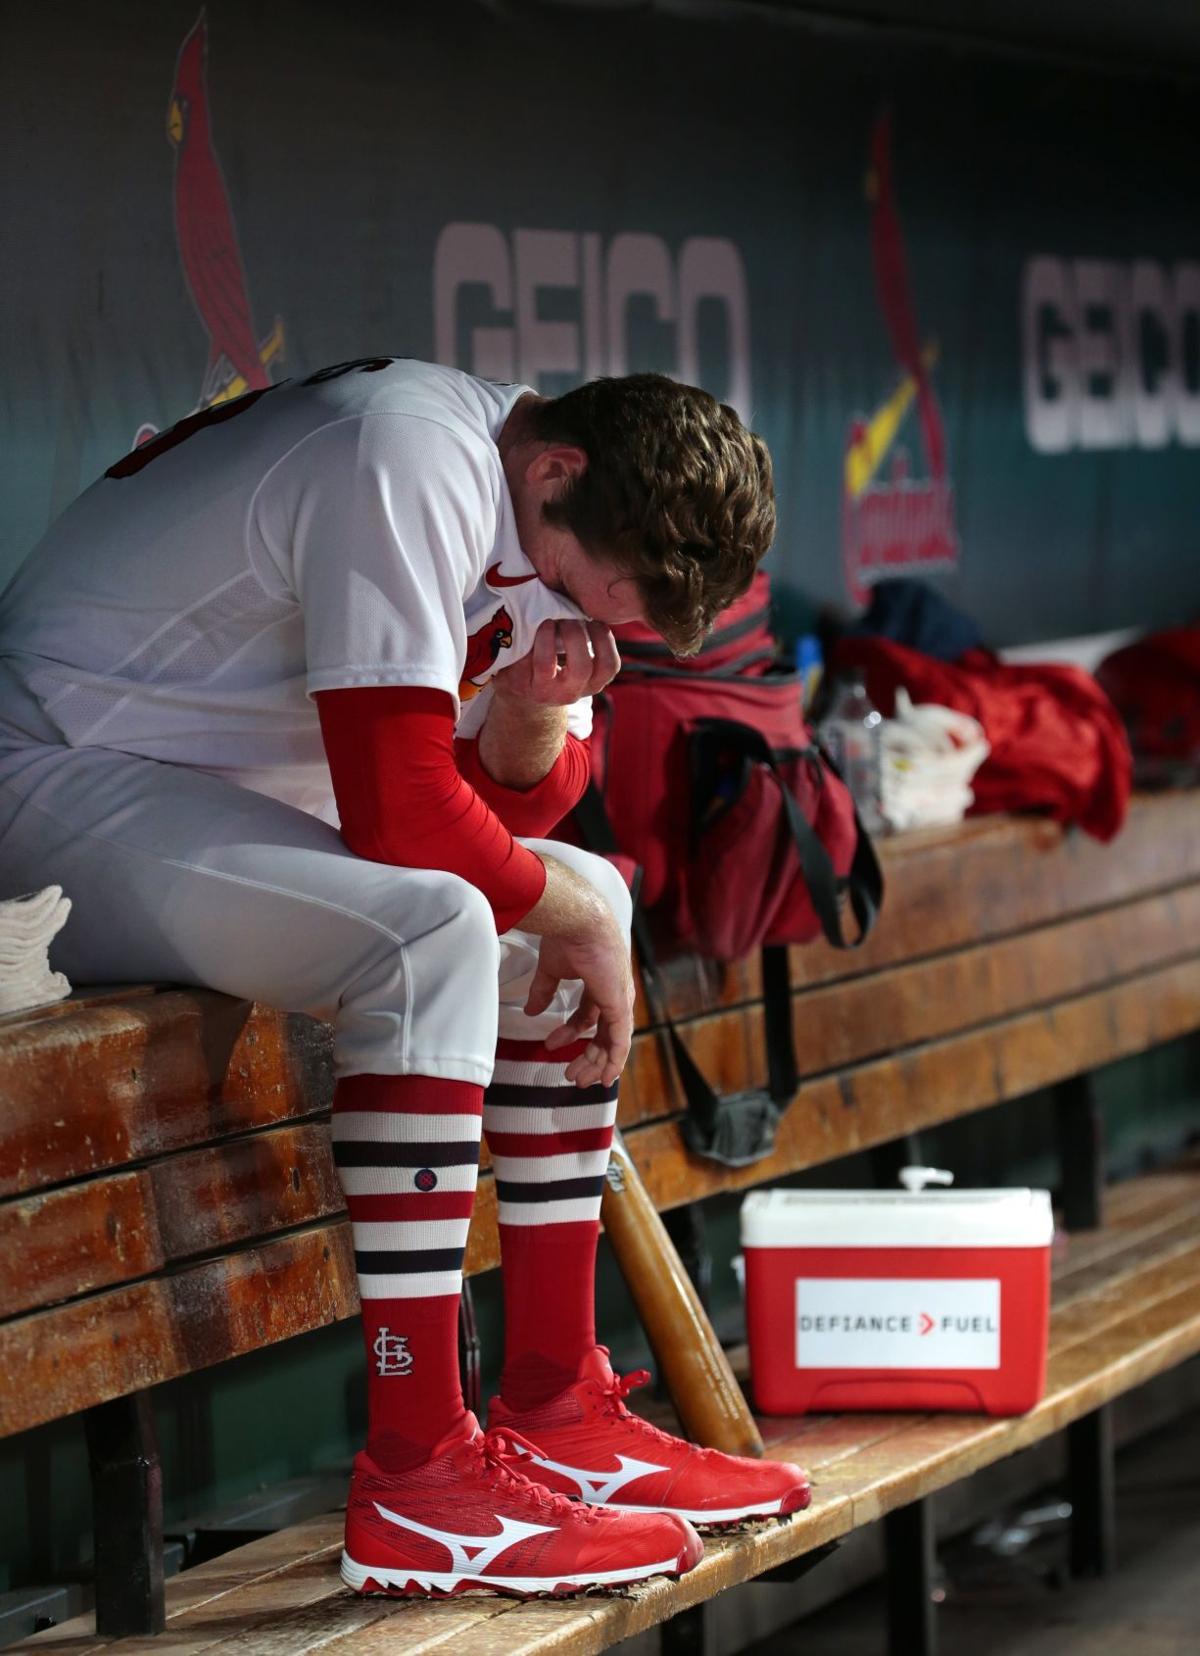 The Inspiration Behind Harrison Bader's Flow …, by Cards Mag-nified